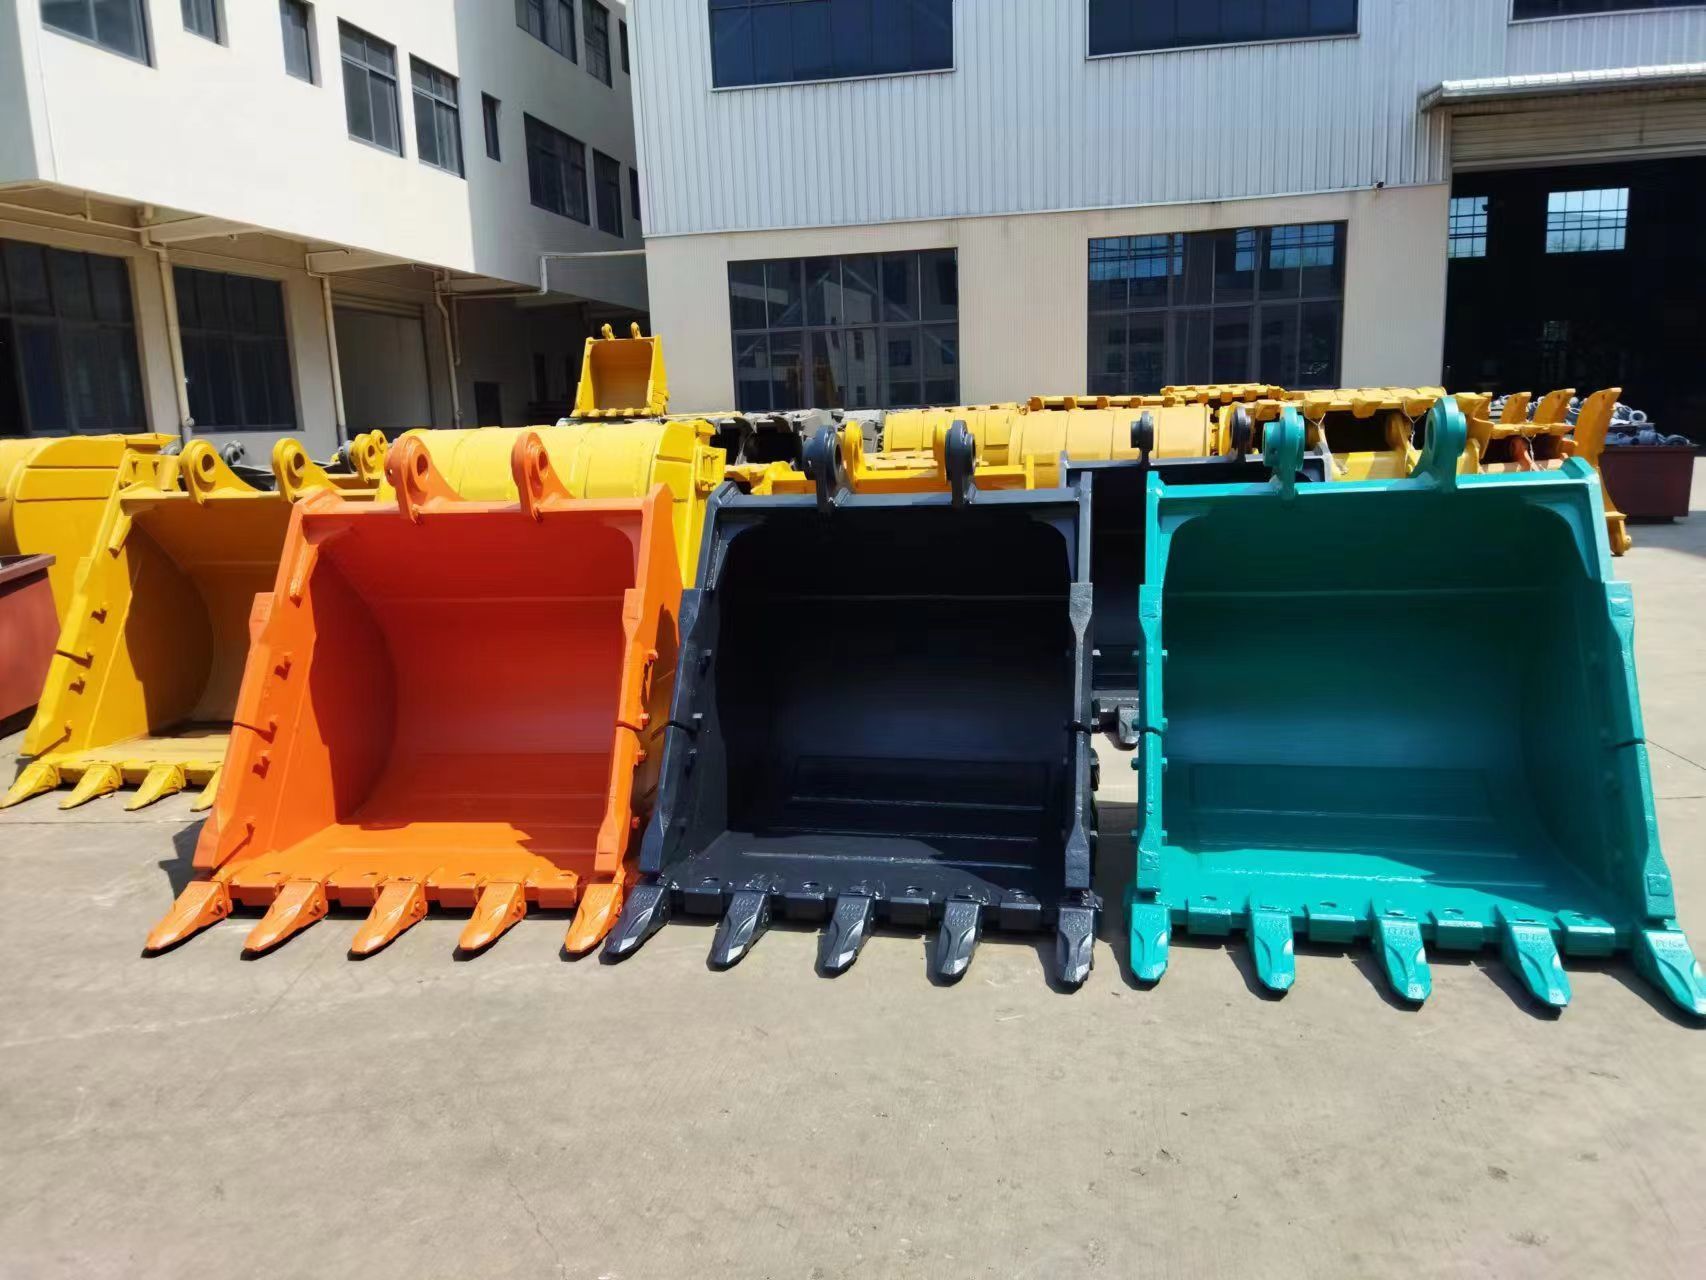 What is the application of bucket liner on engineering machinery？